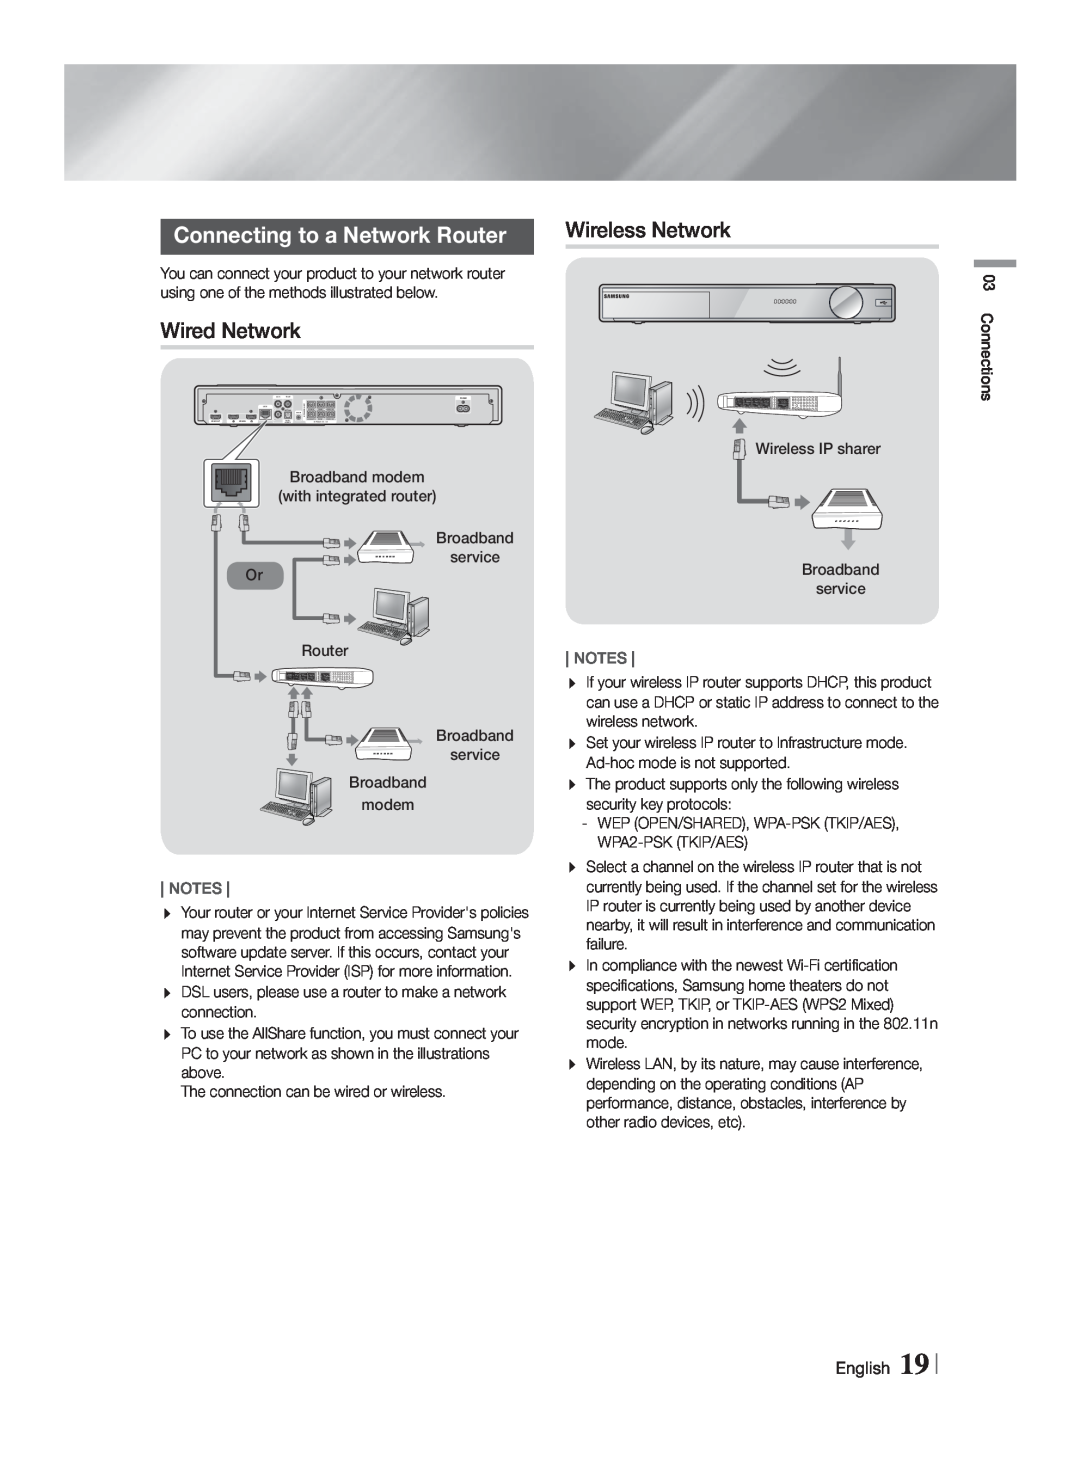 Samsung HT-F9730W/ZA user manual Connecting to a Network Router, Wireless Network, Wired Network, English 19, Notes 